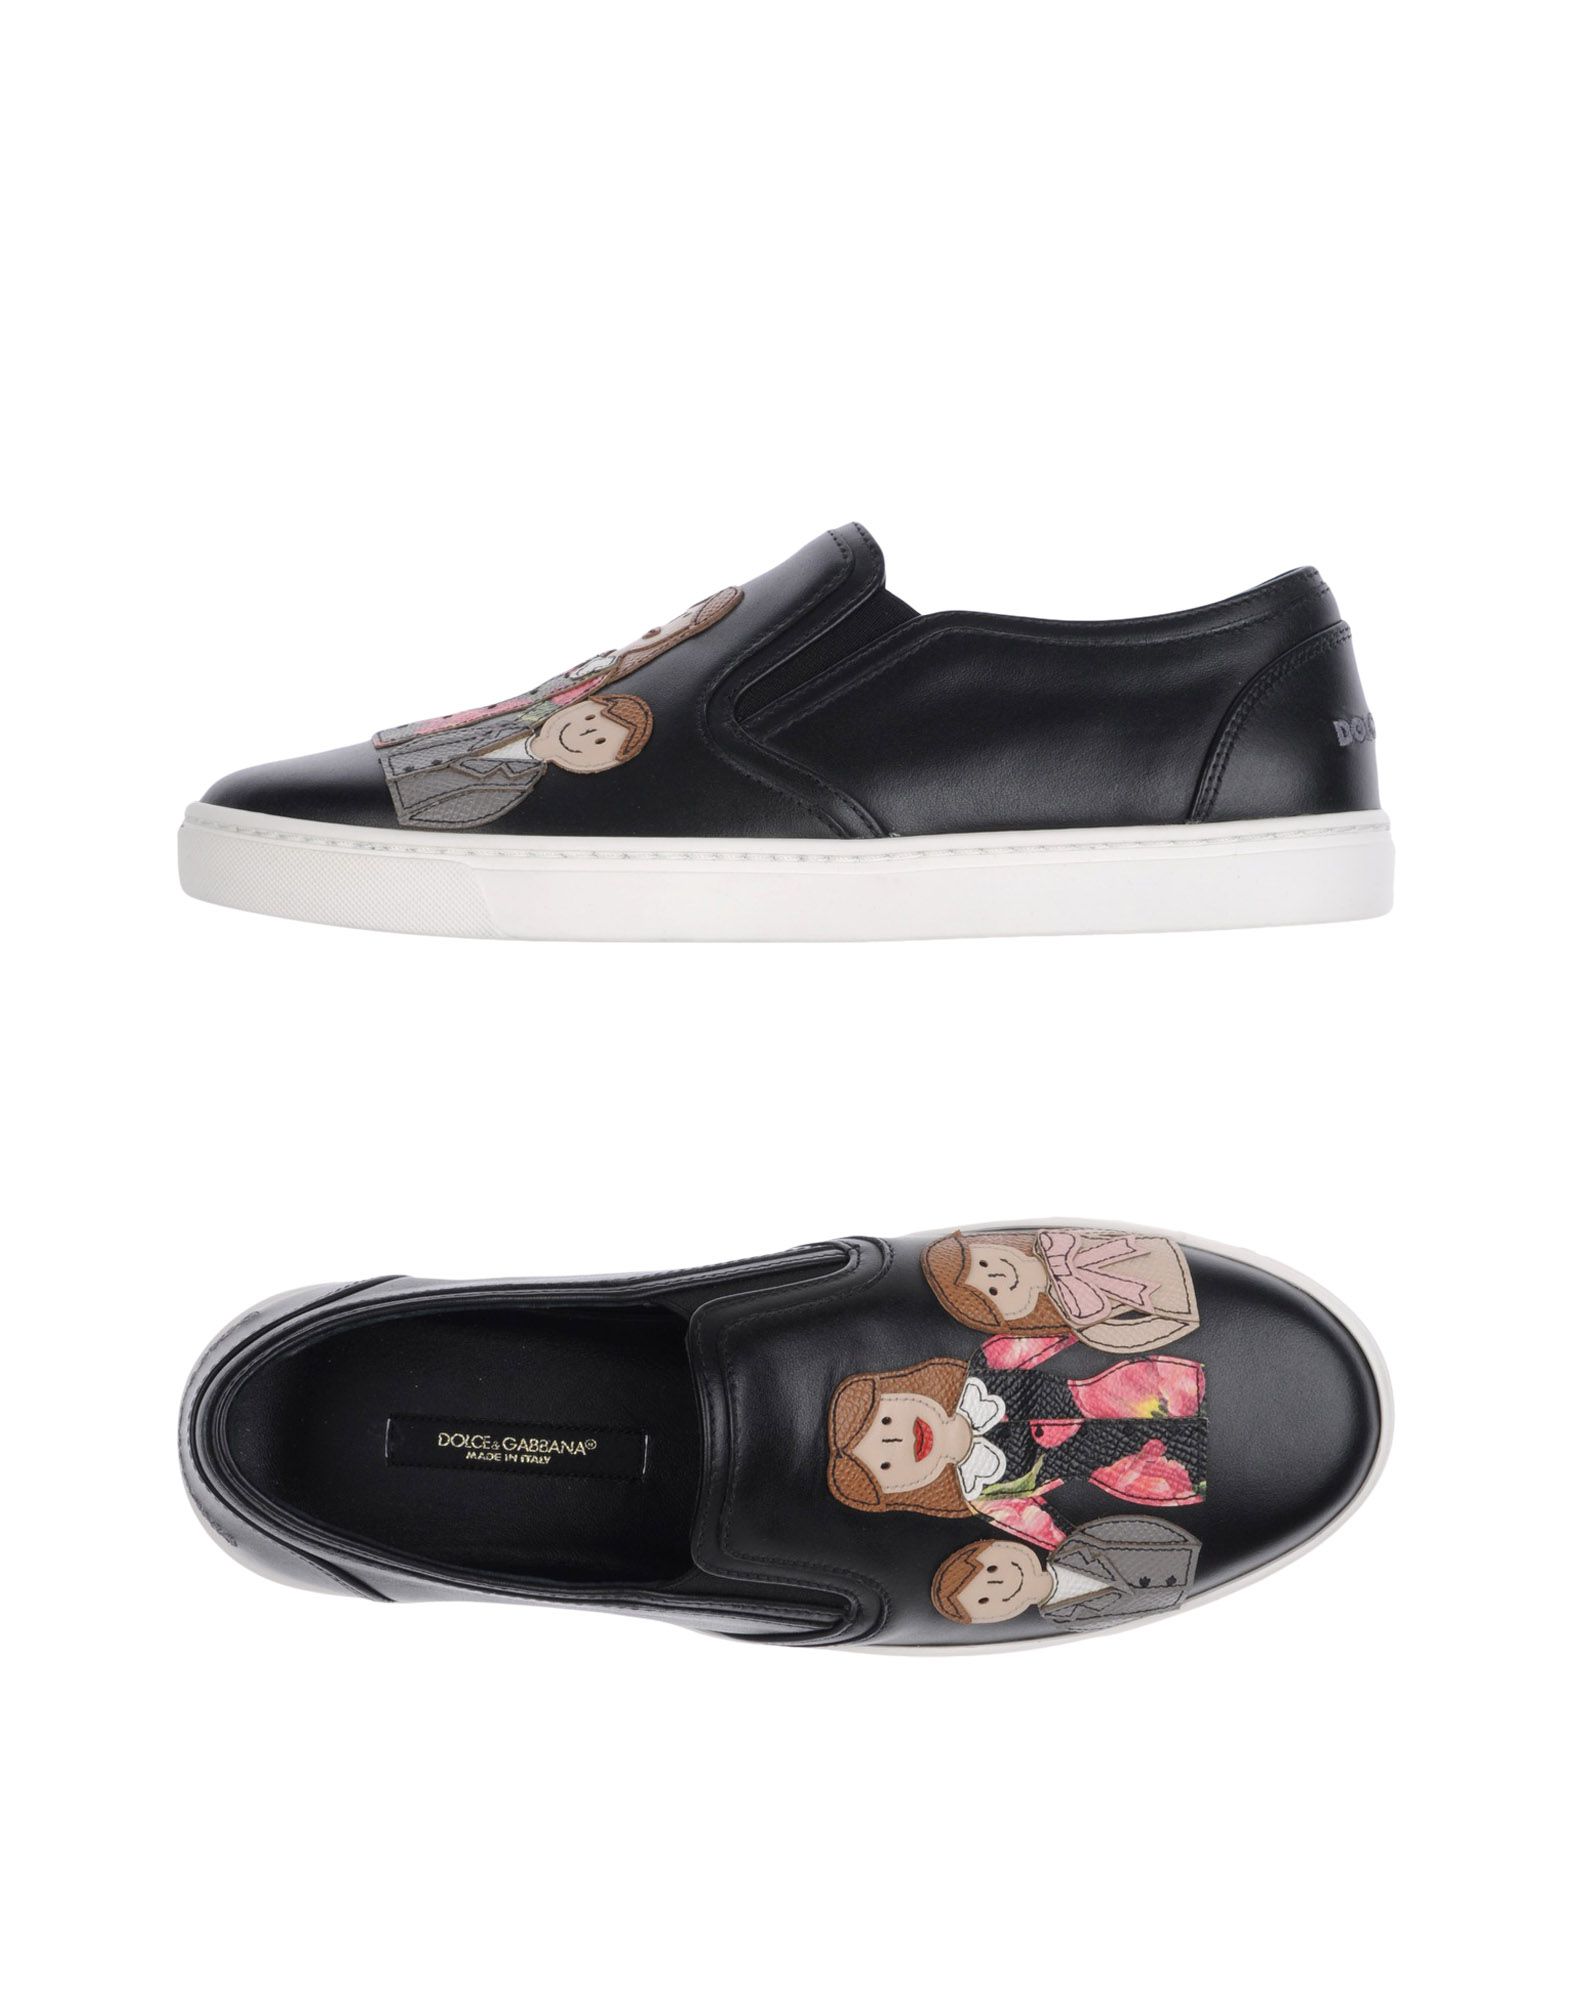 DOLCE & GABBANA trainers,11305420DT 3